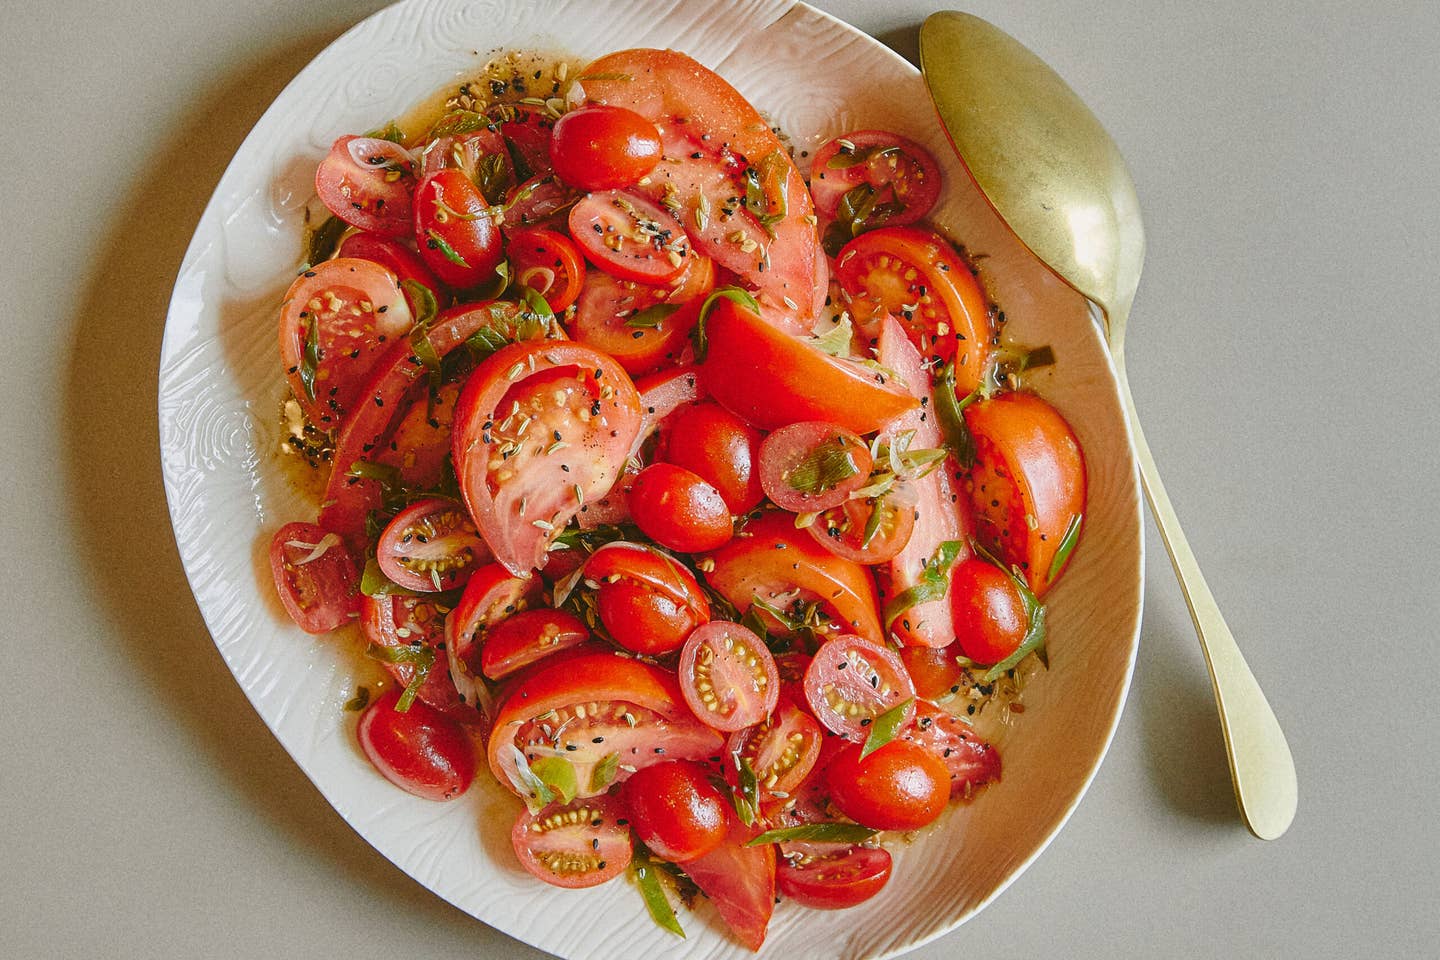 Tomato Salad with Scallions and Warm Brown Butter Vinaigrette